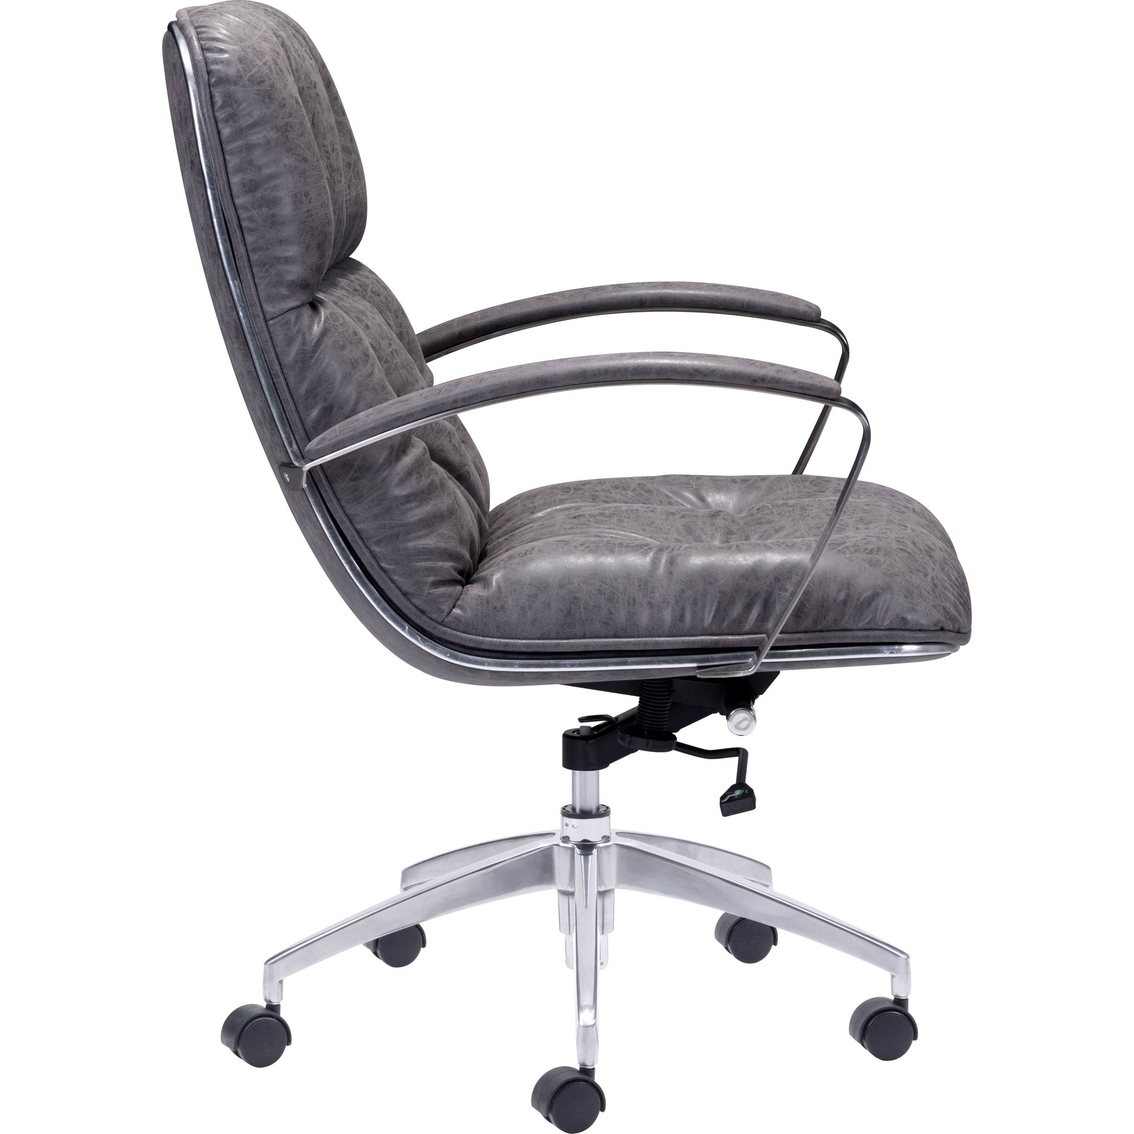 Zuo Modern Avenue Office Chair - Image 2 of 4